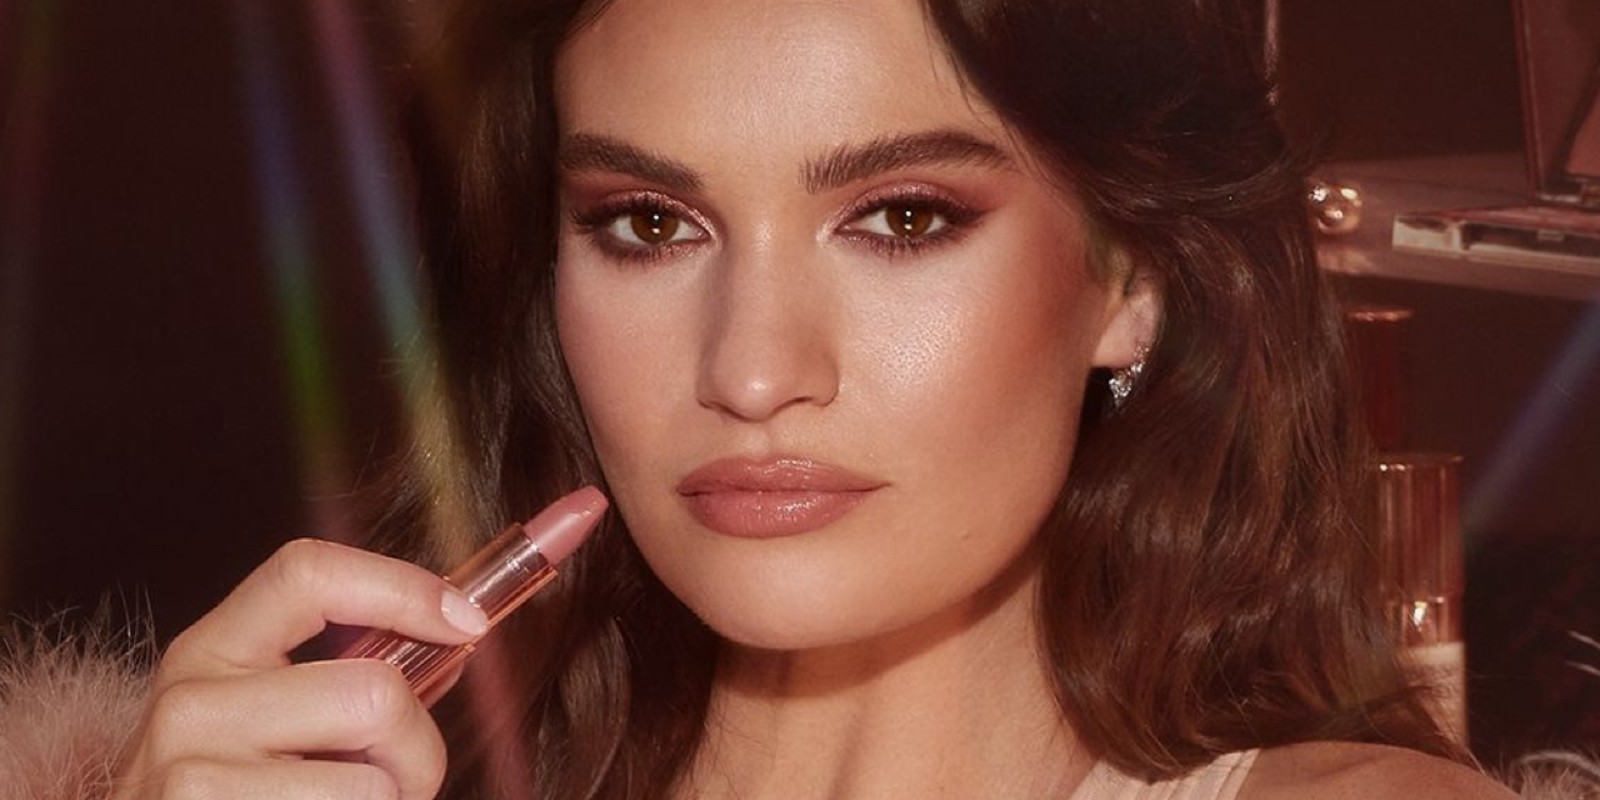 holiday gifts for girlfriends - Lily James model image